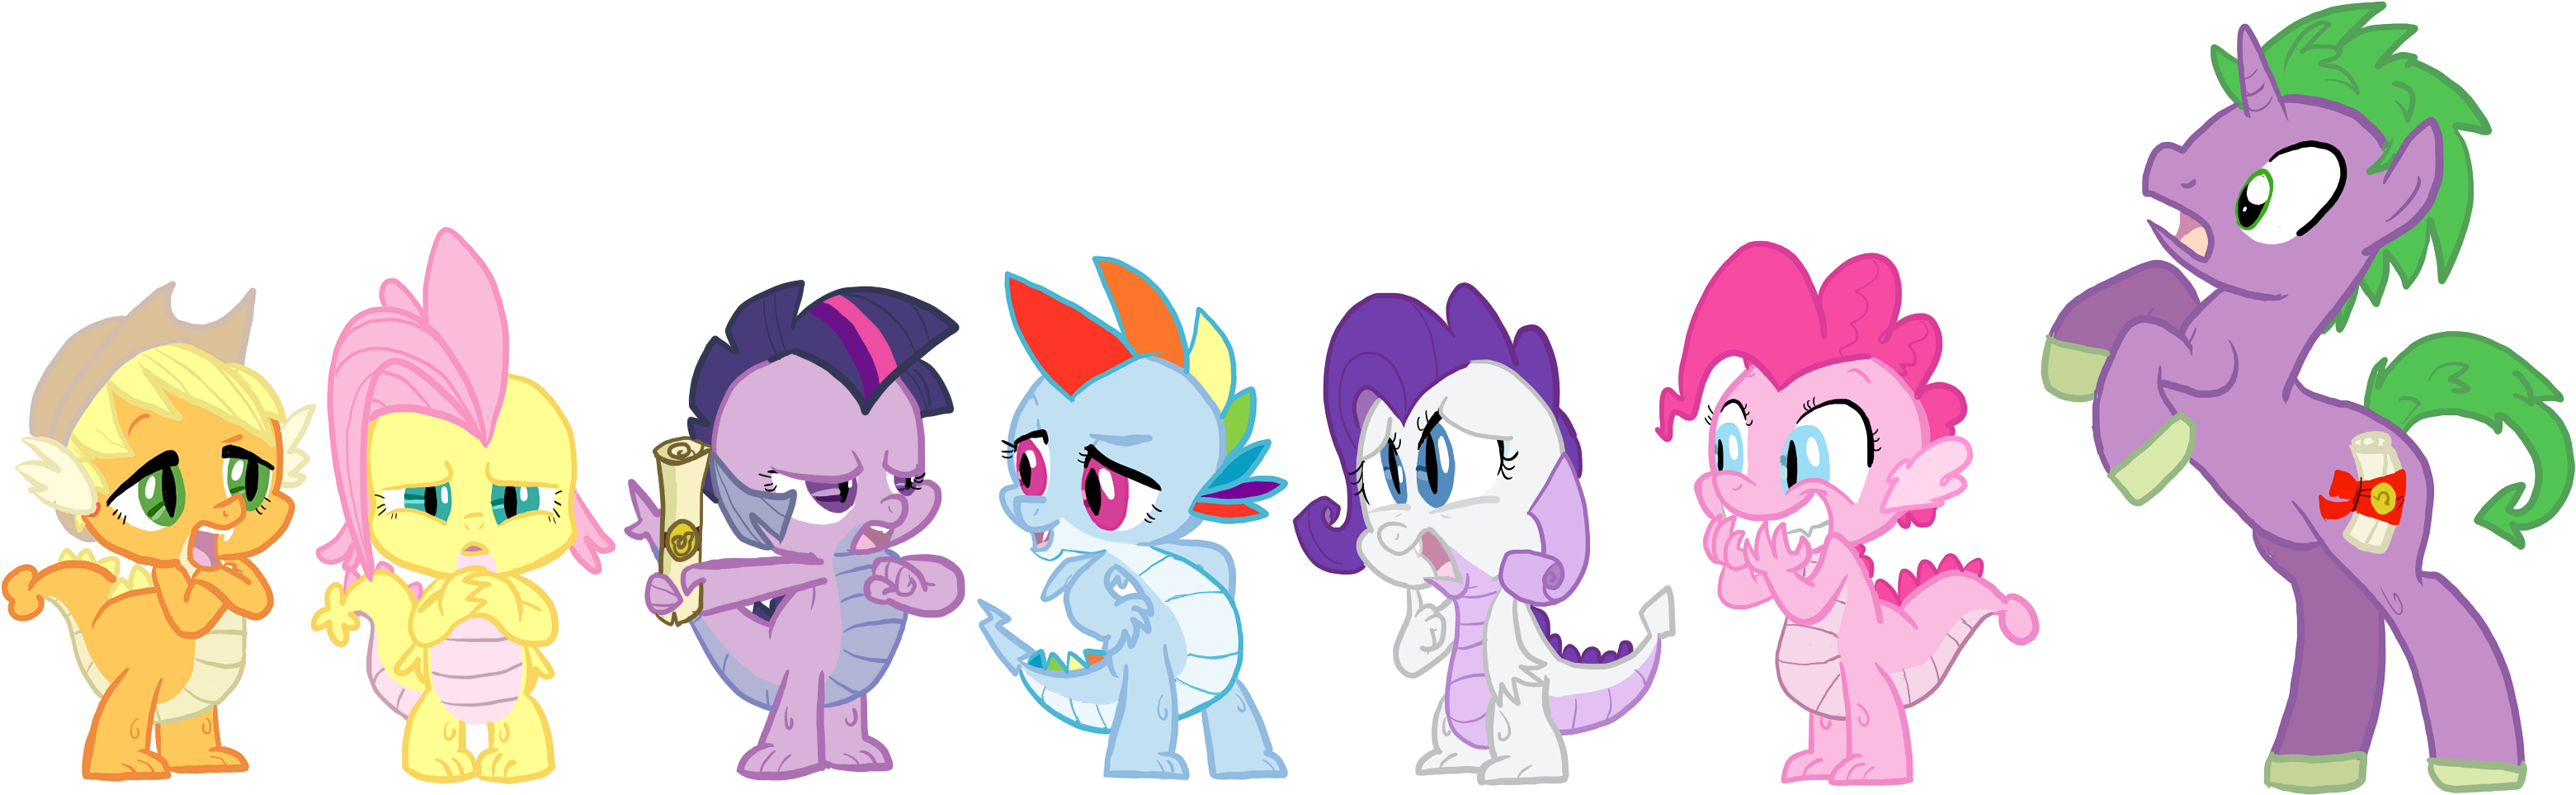 My Little Pony Friendship Is Magic Filly Version - Mlp Base 2 Friends (3323x1000)